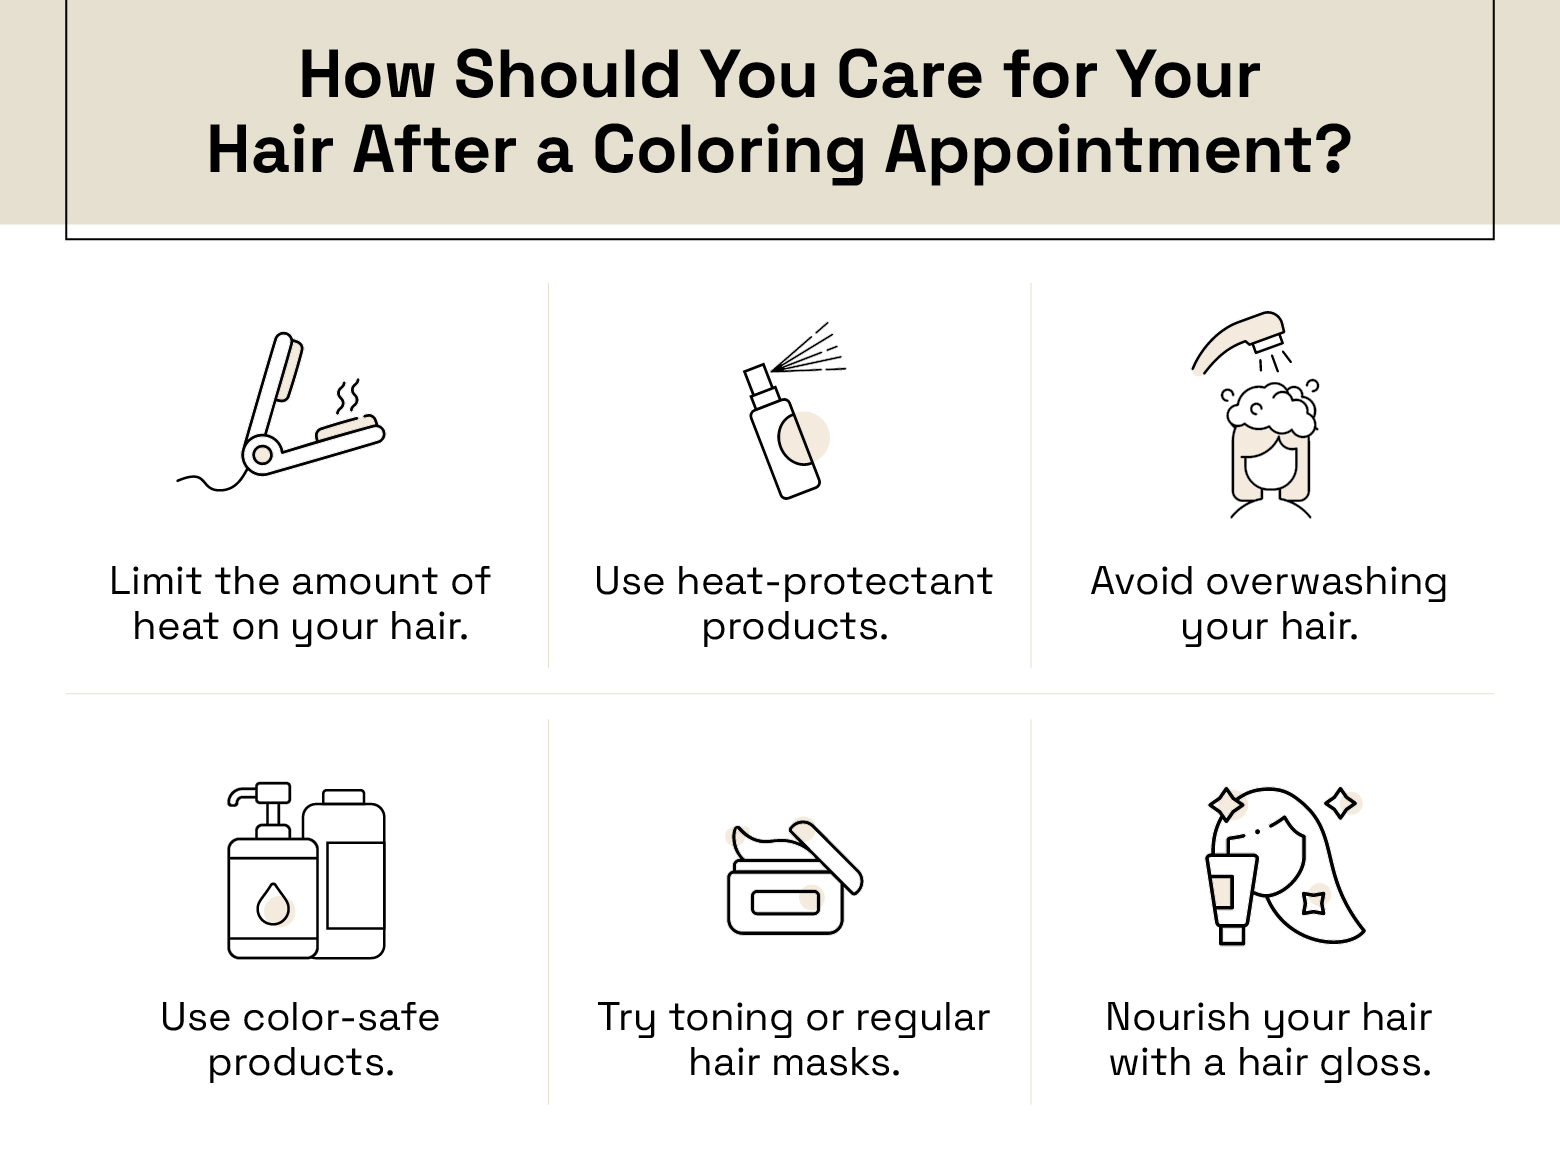 how should you care for hair after coloring appointment